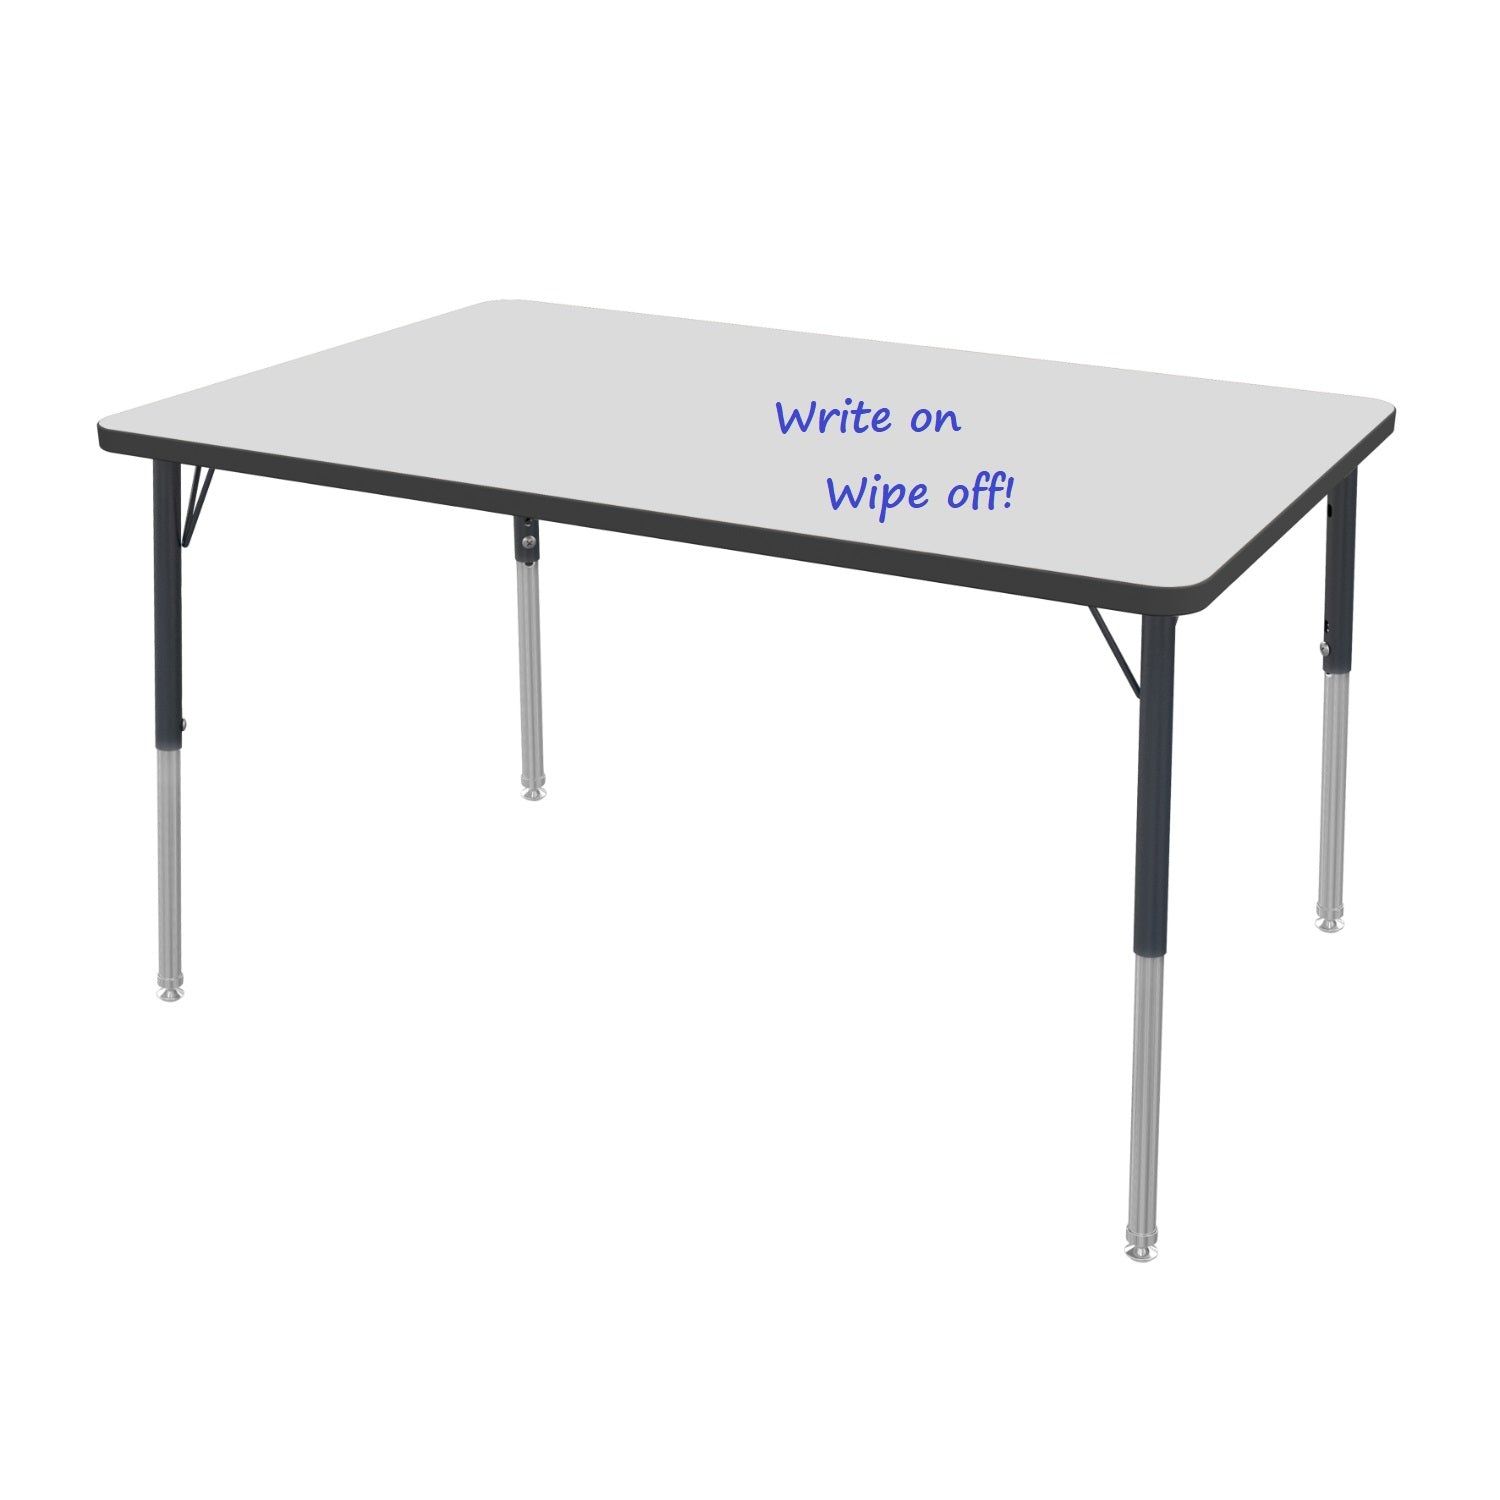 MG Series Adjustable Height Activity Table with White Dry Erase Markerboard Top, 36" x 60" Rectangle